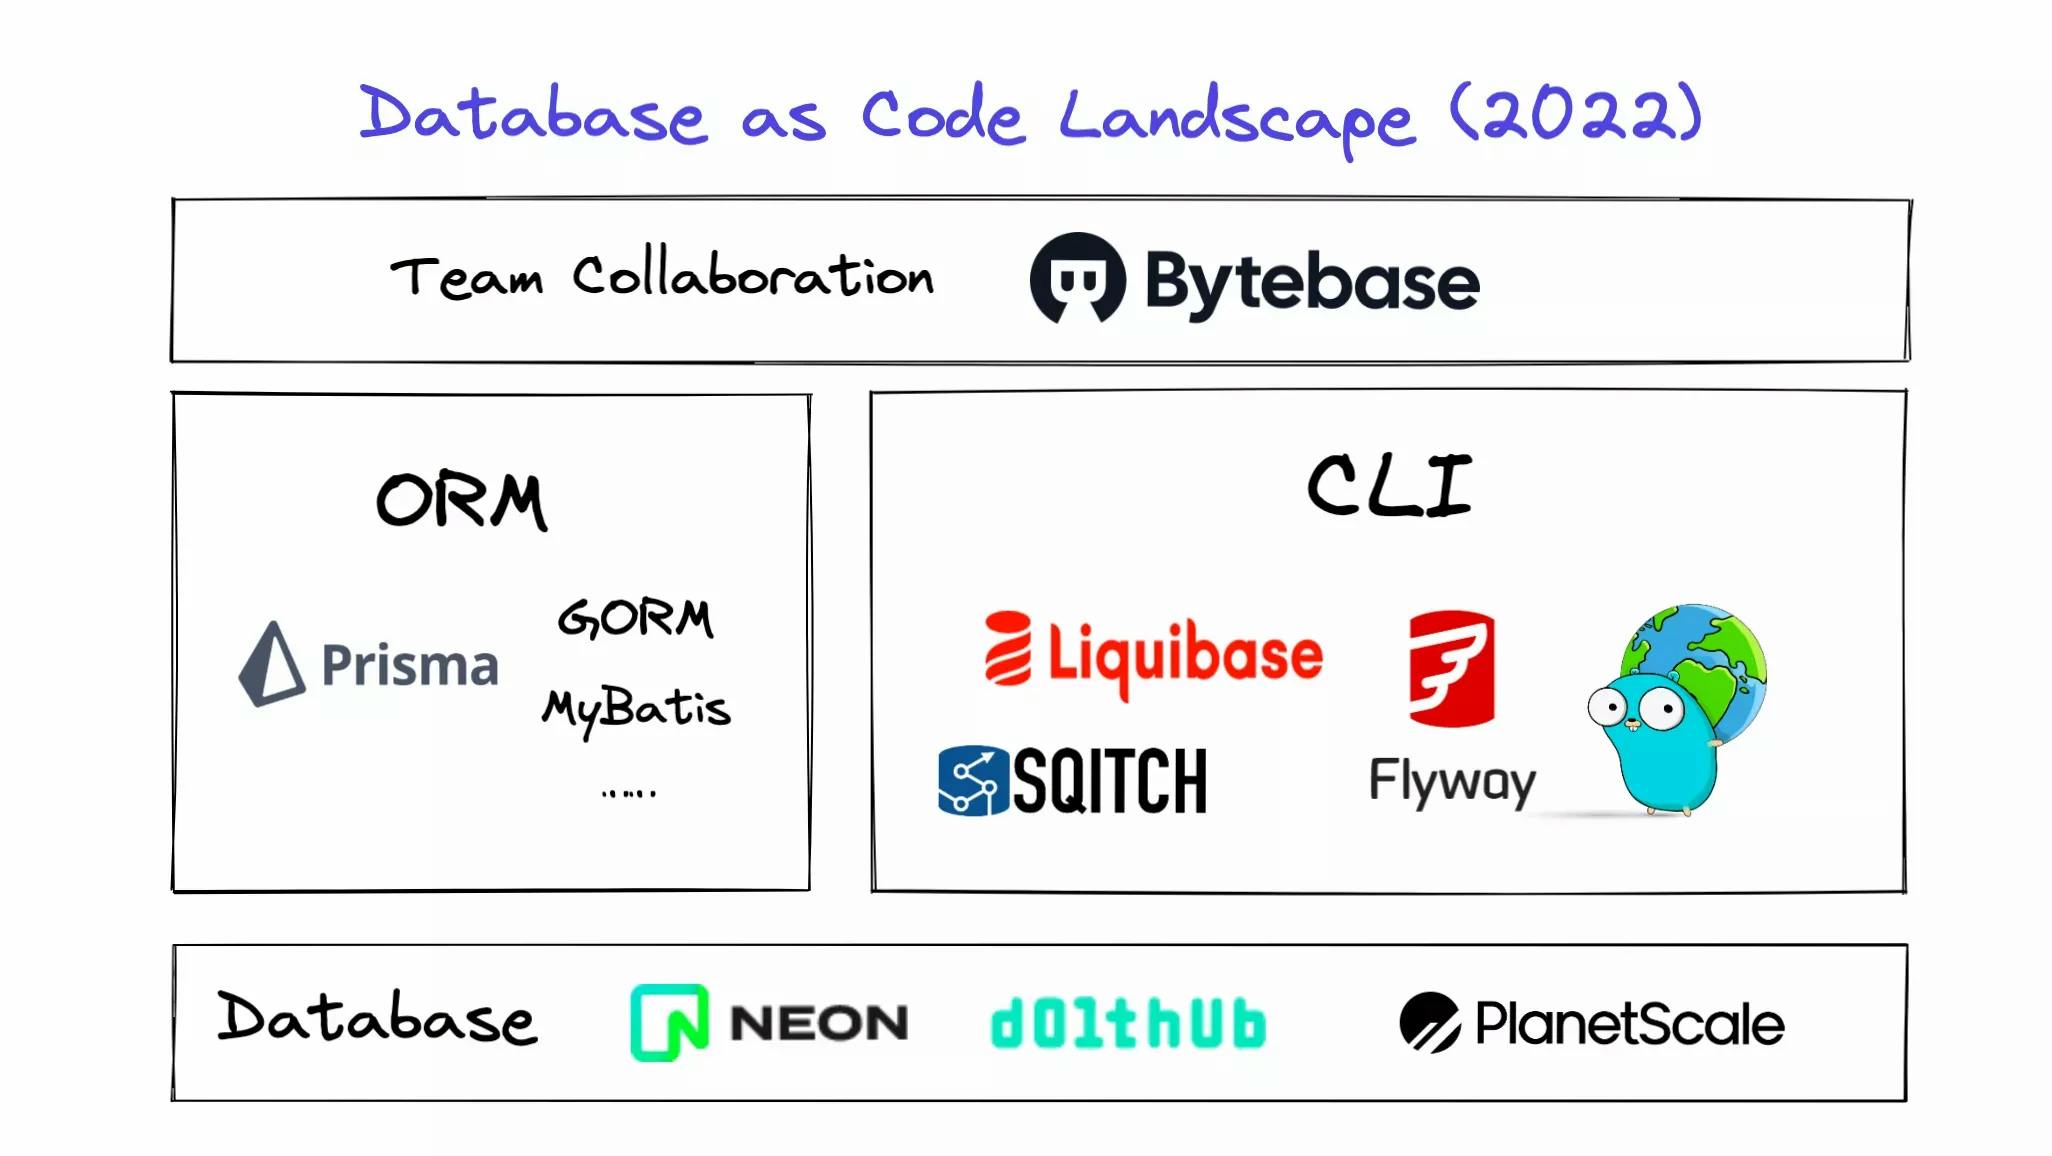 The Database as Code Landscape